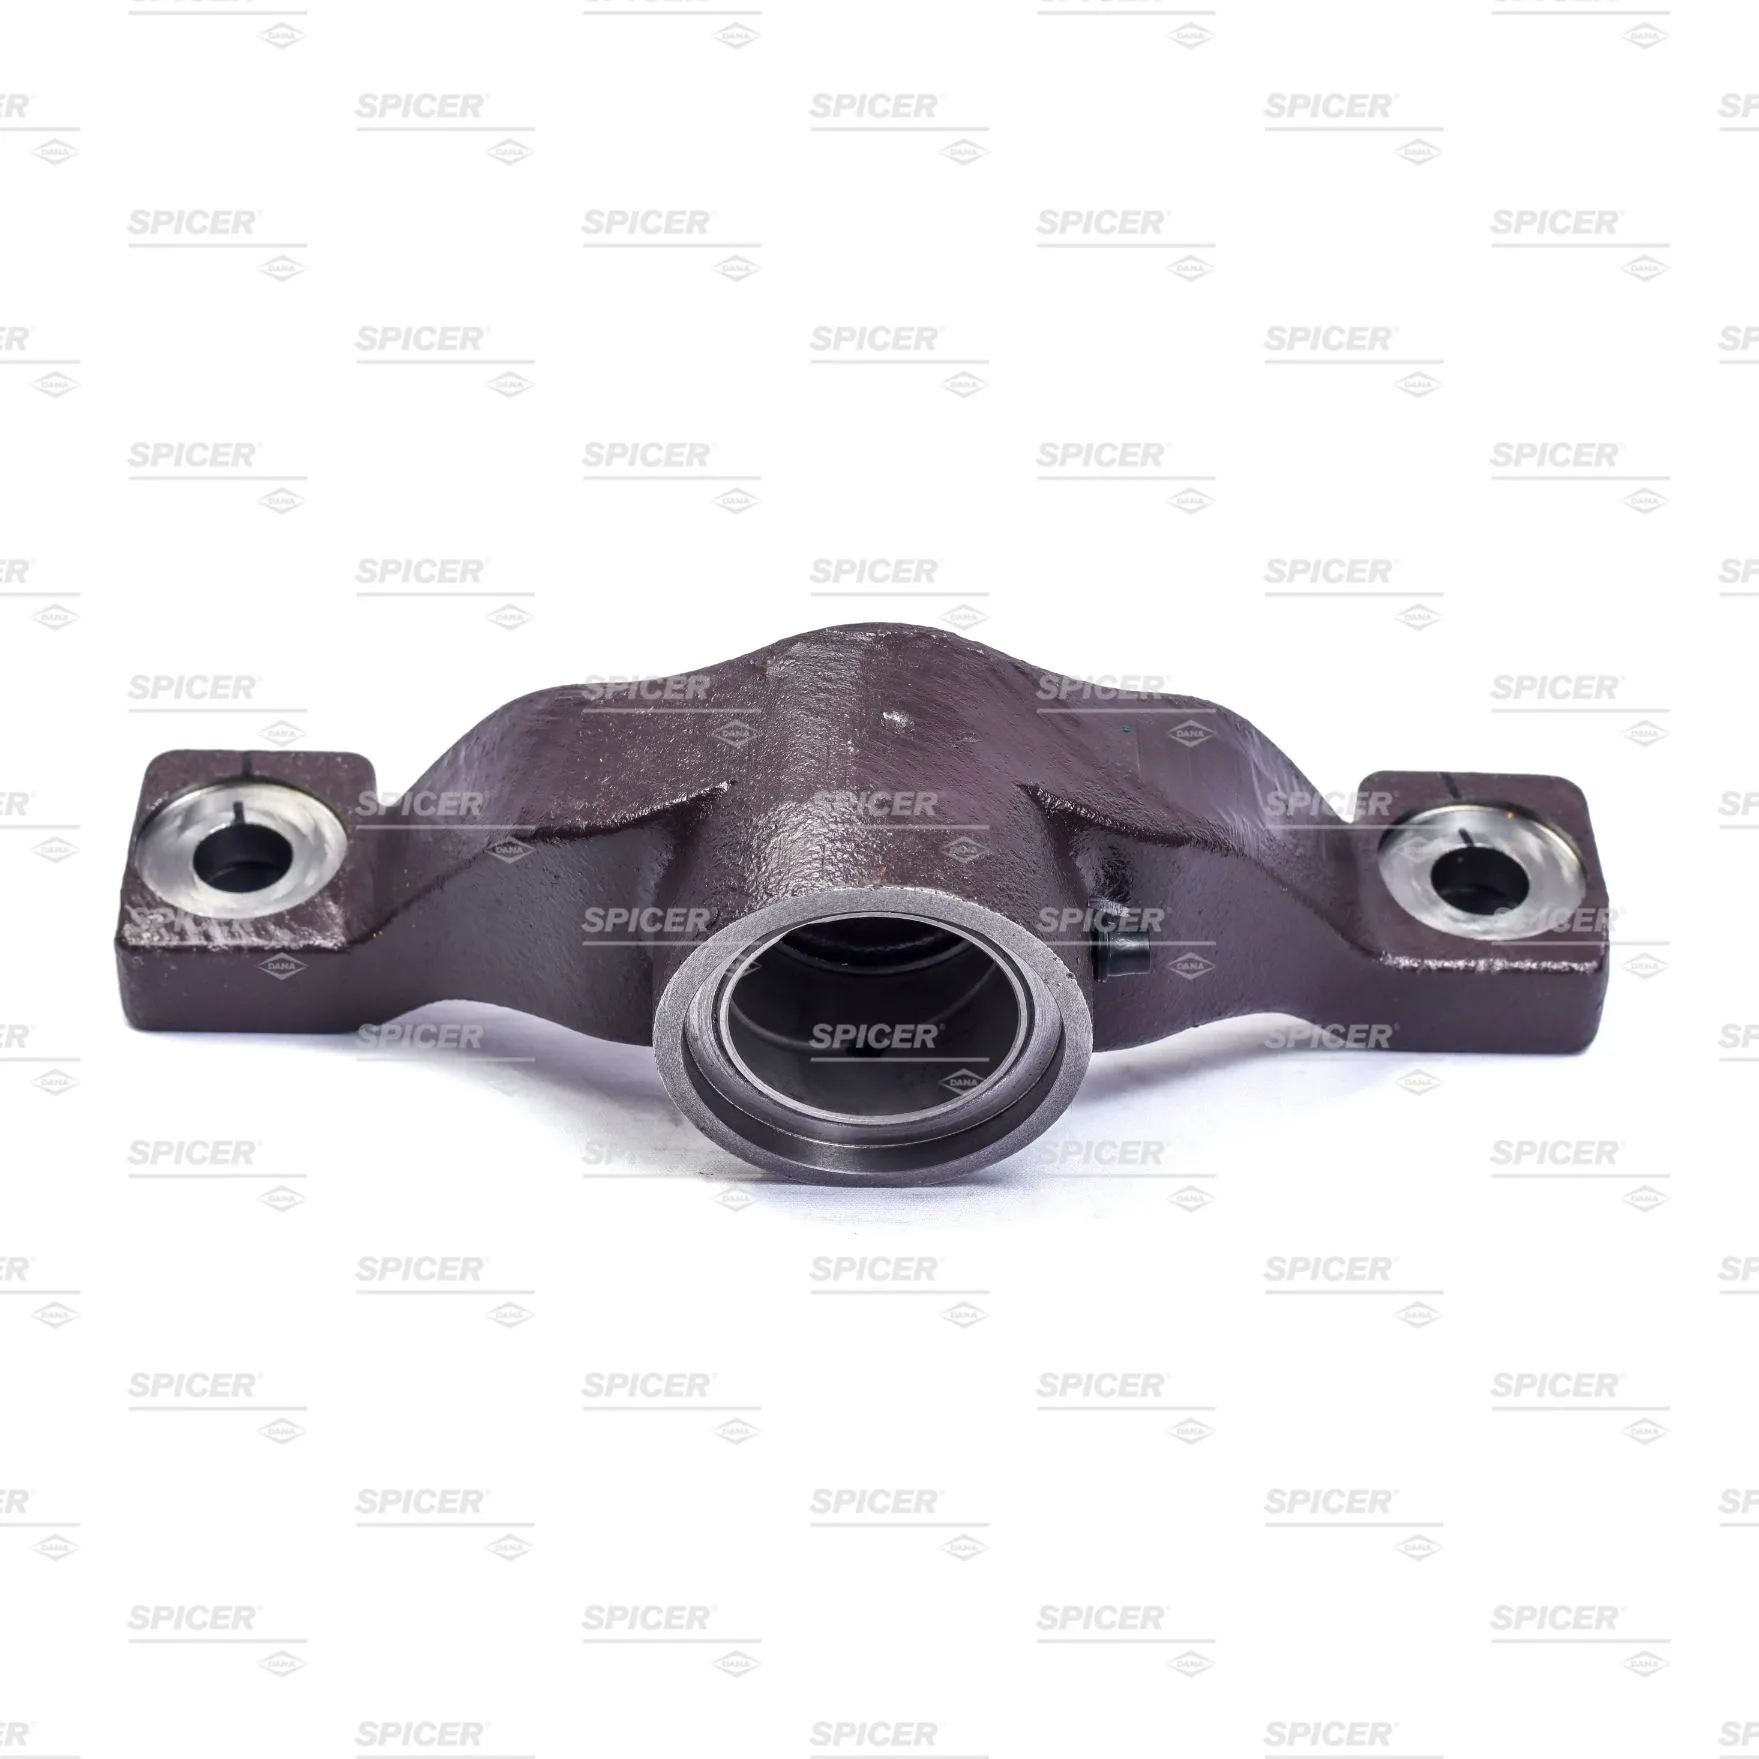 Spicer + Axle + Steering Components + Trunnion Assy - Rear + S20TU111-X_SP + buy